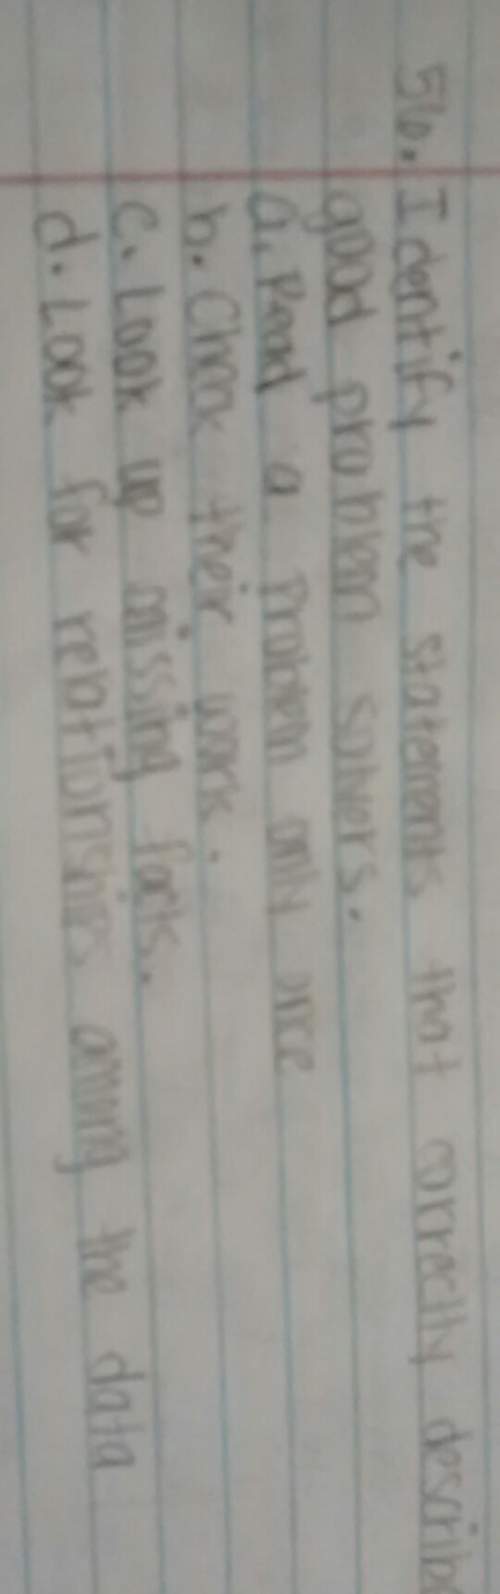 I'm sorry if you all can't see this, but the question asks me to identify the statements that correc